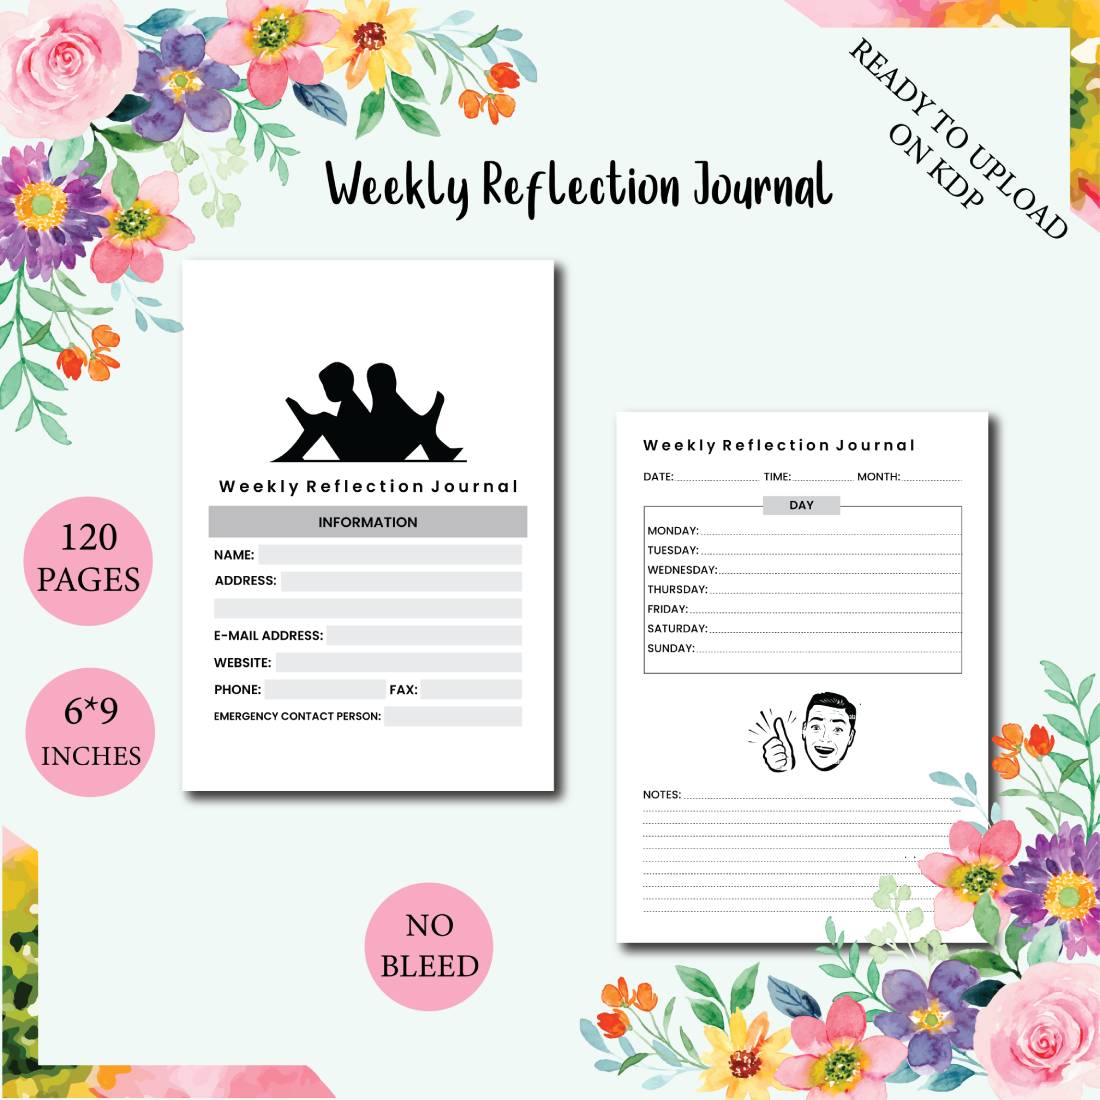 The weekly reflection journal with flowers and flowers around it.